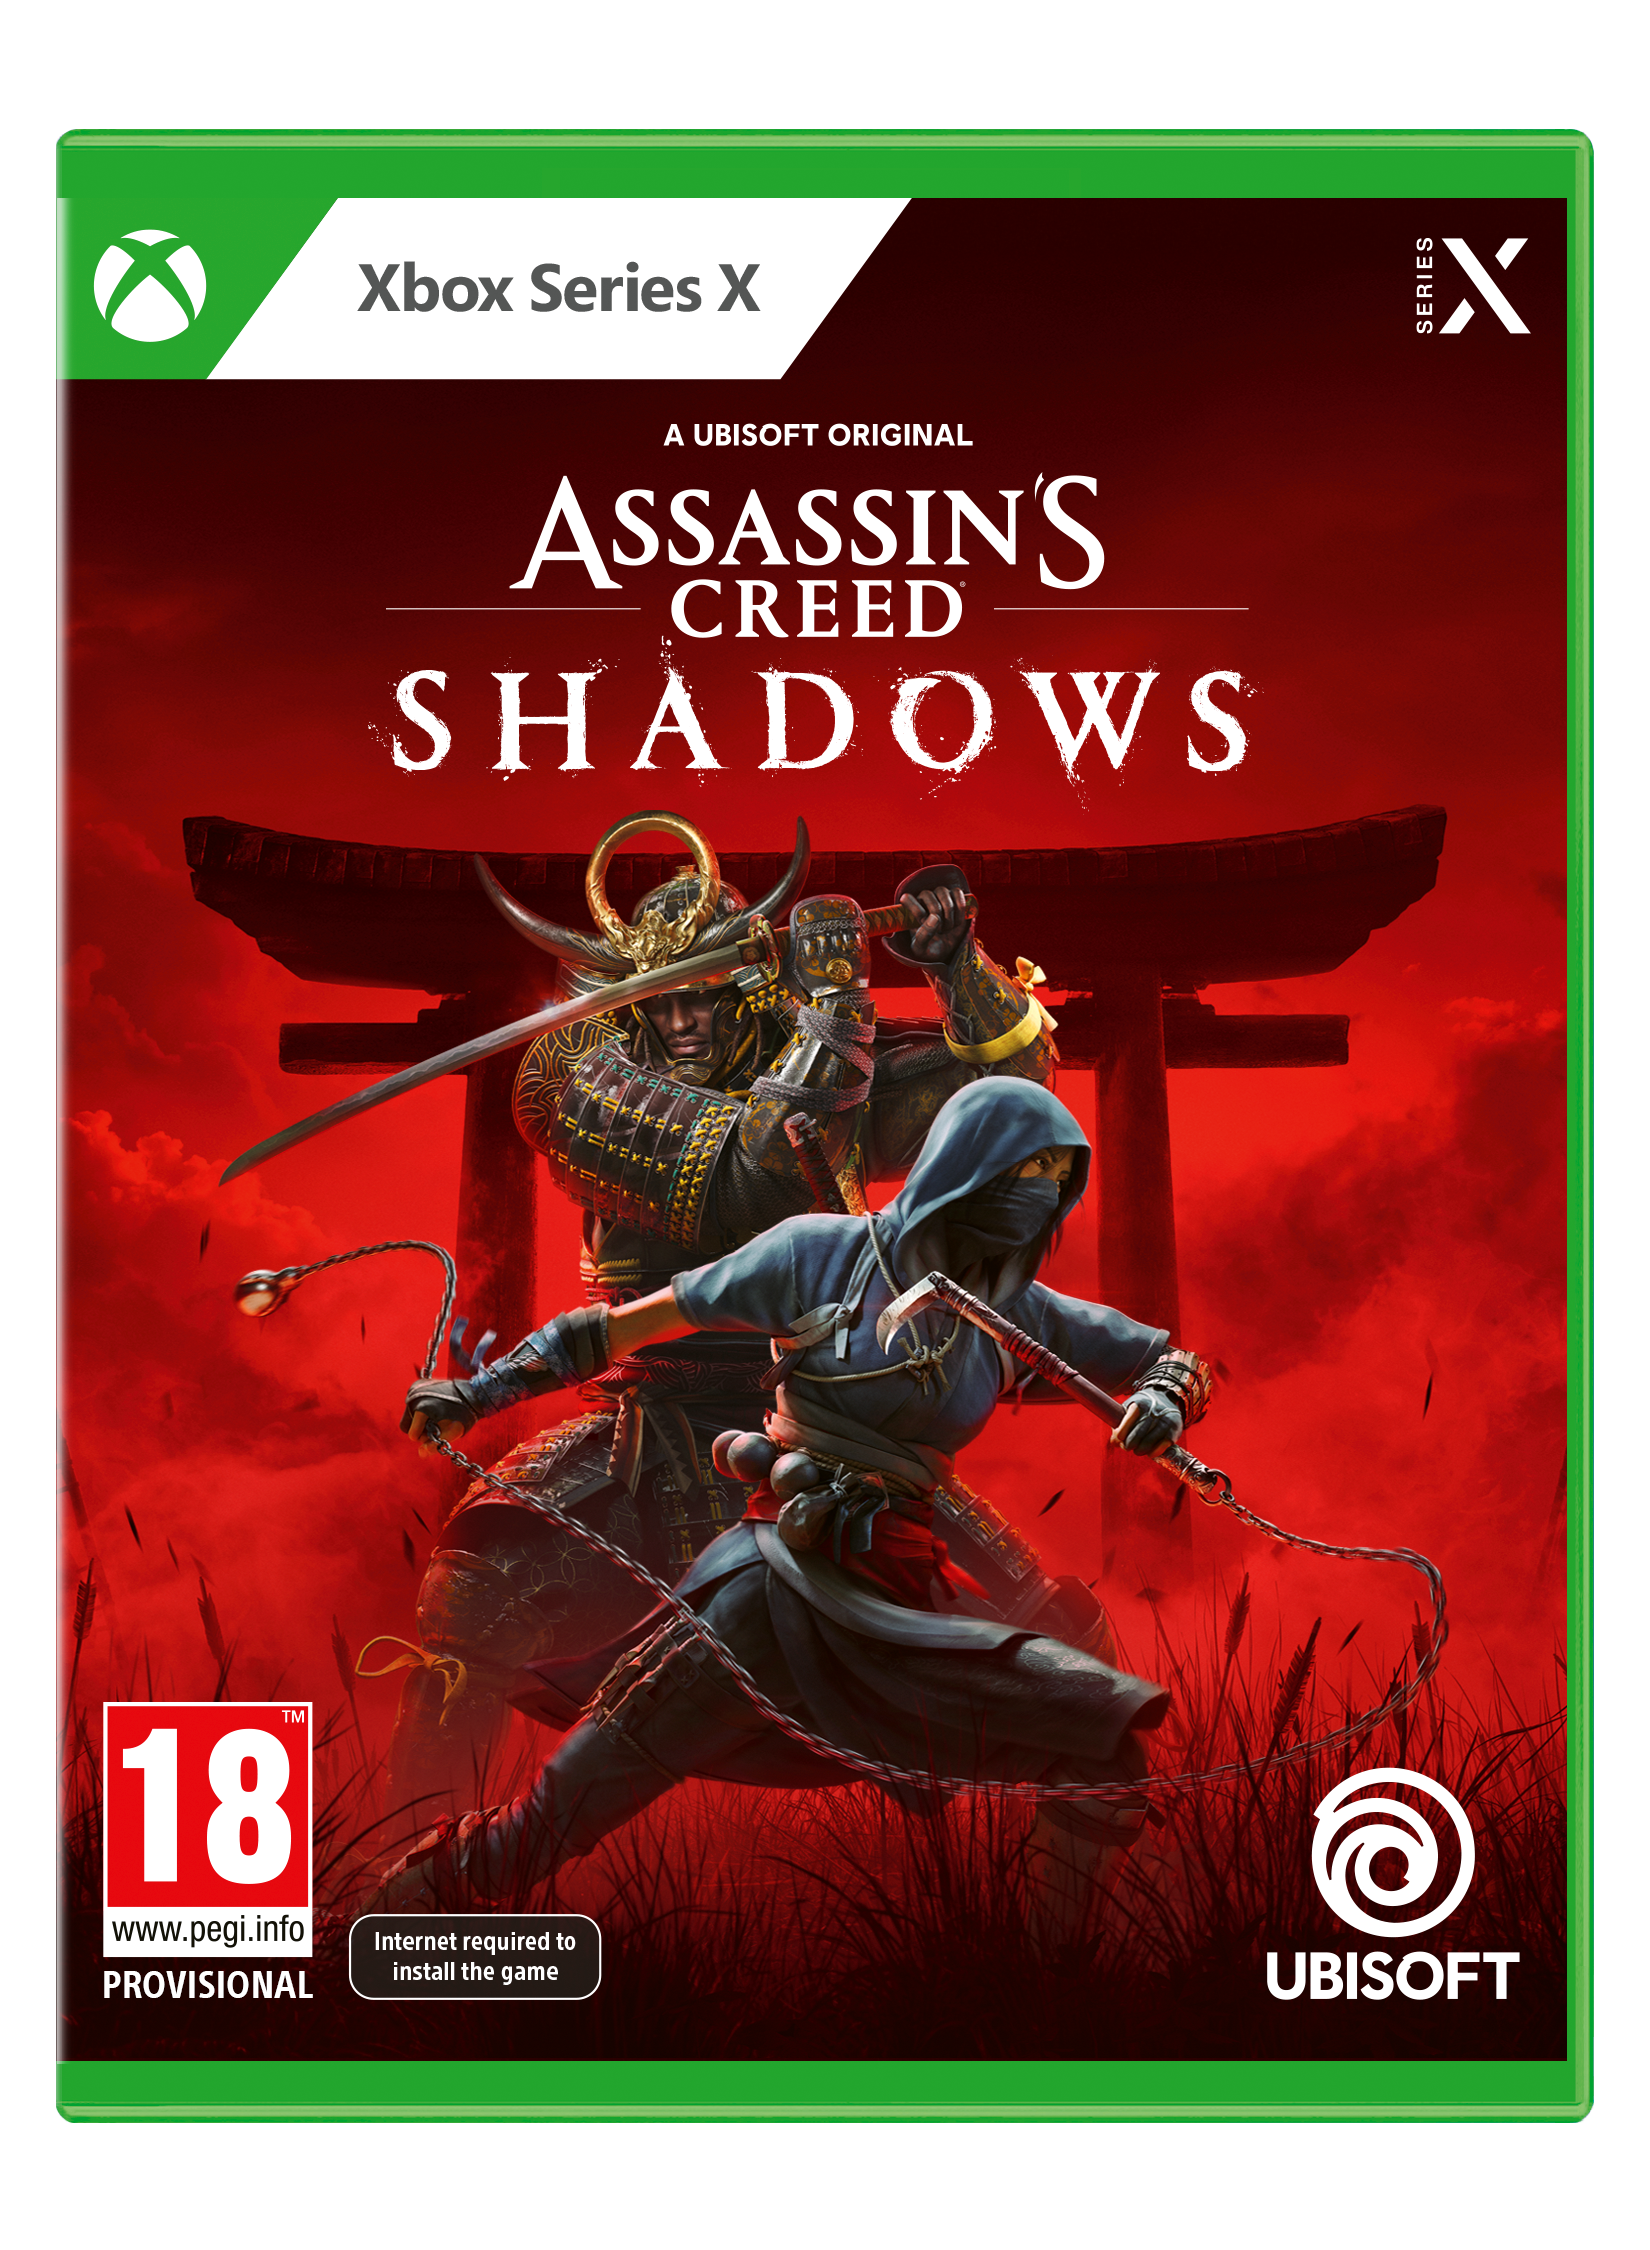 ASSASSINS CREED SHADOWS SPECIAL EDITION (XBSX)